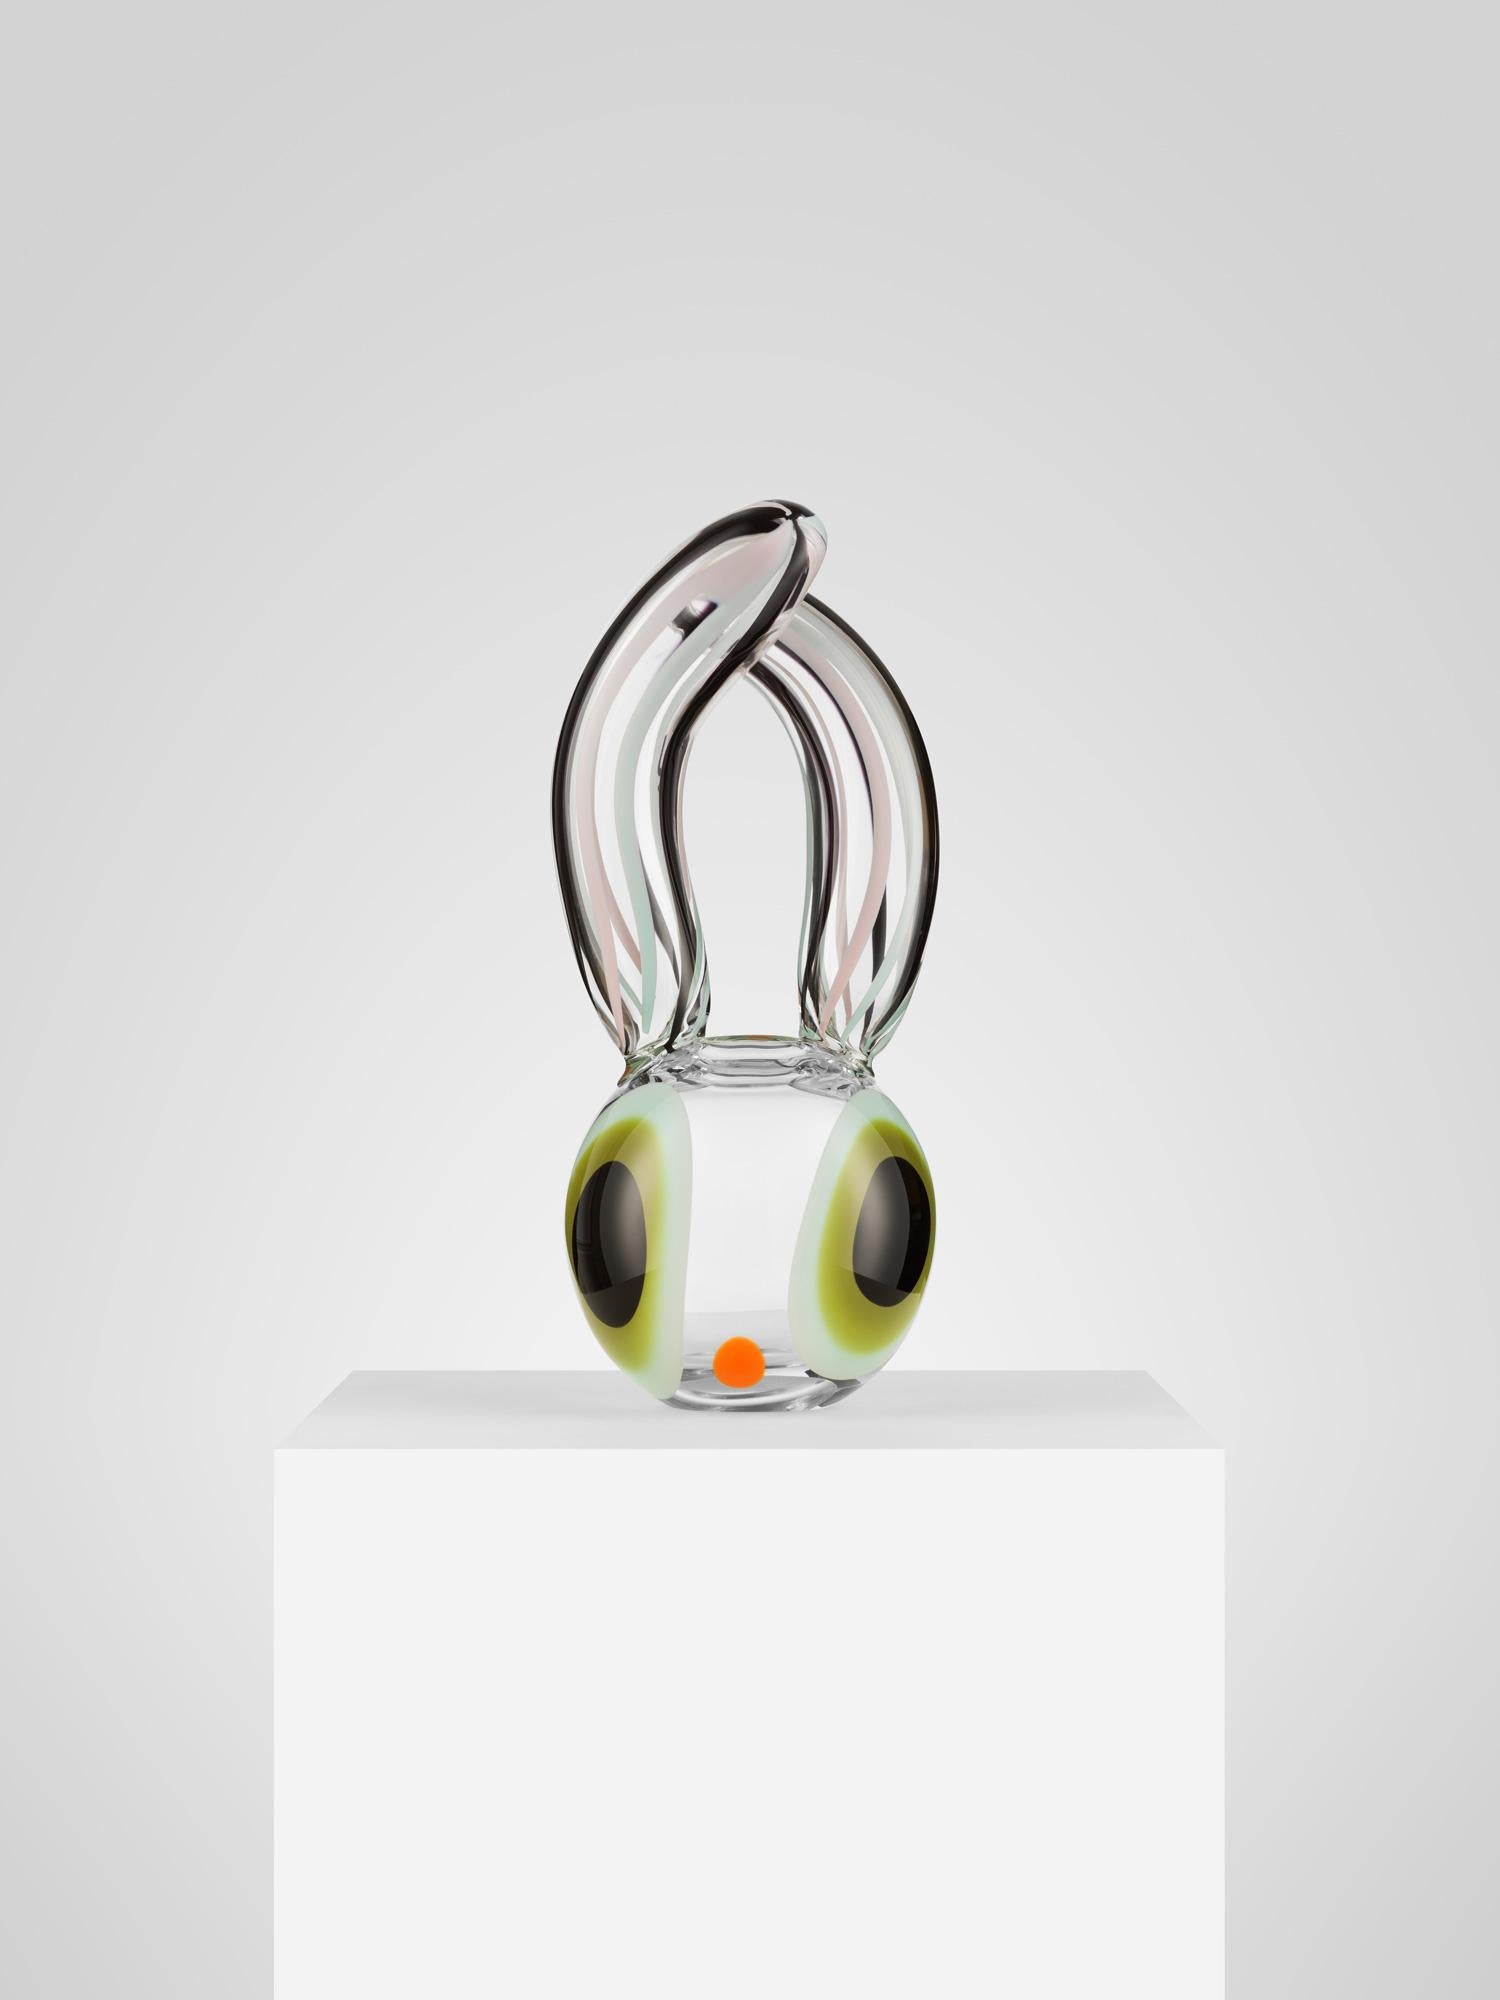 With What’s Up?/Why Not, Frida Fjellman has developed her Erik-Höglund-inspired glass sculptures with the same individual style. Fjellman has chosen to emphasize the properties that appeal to her – shimmering, flowing, fascinating and playful. This